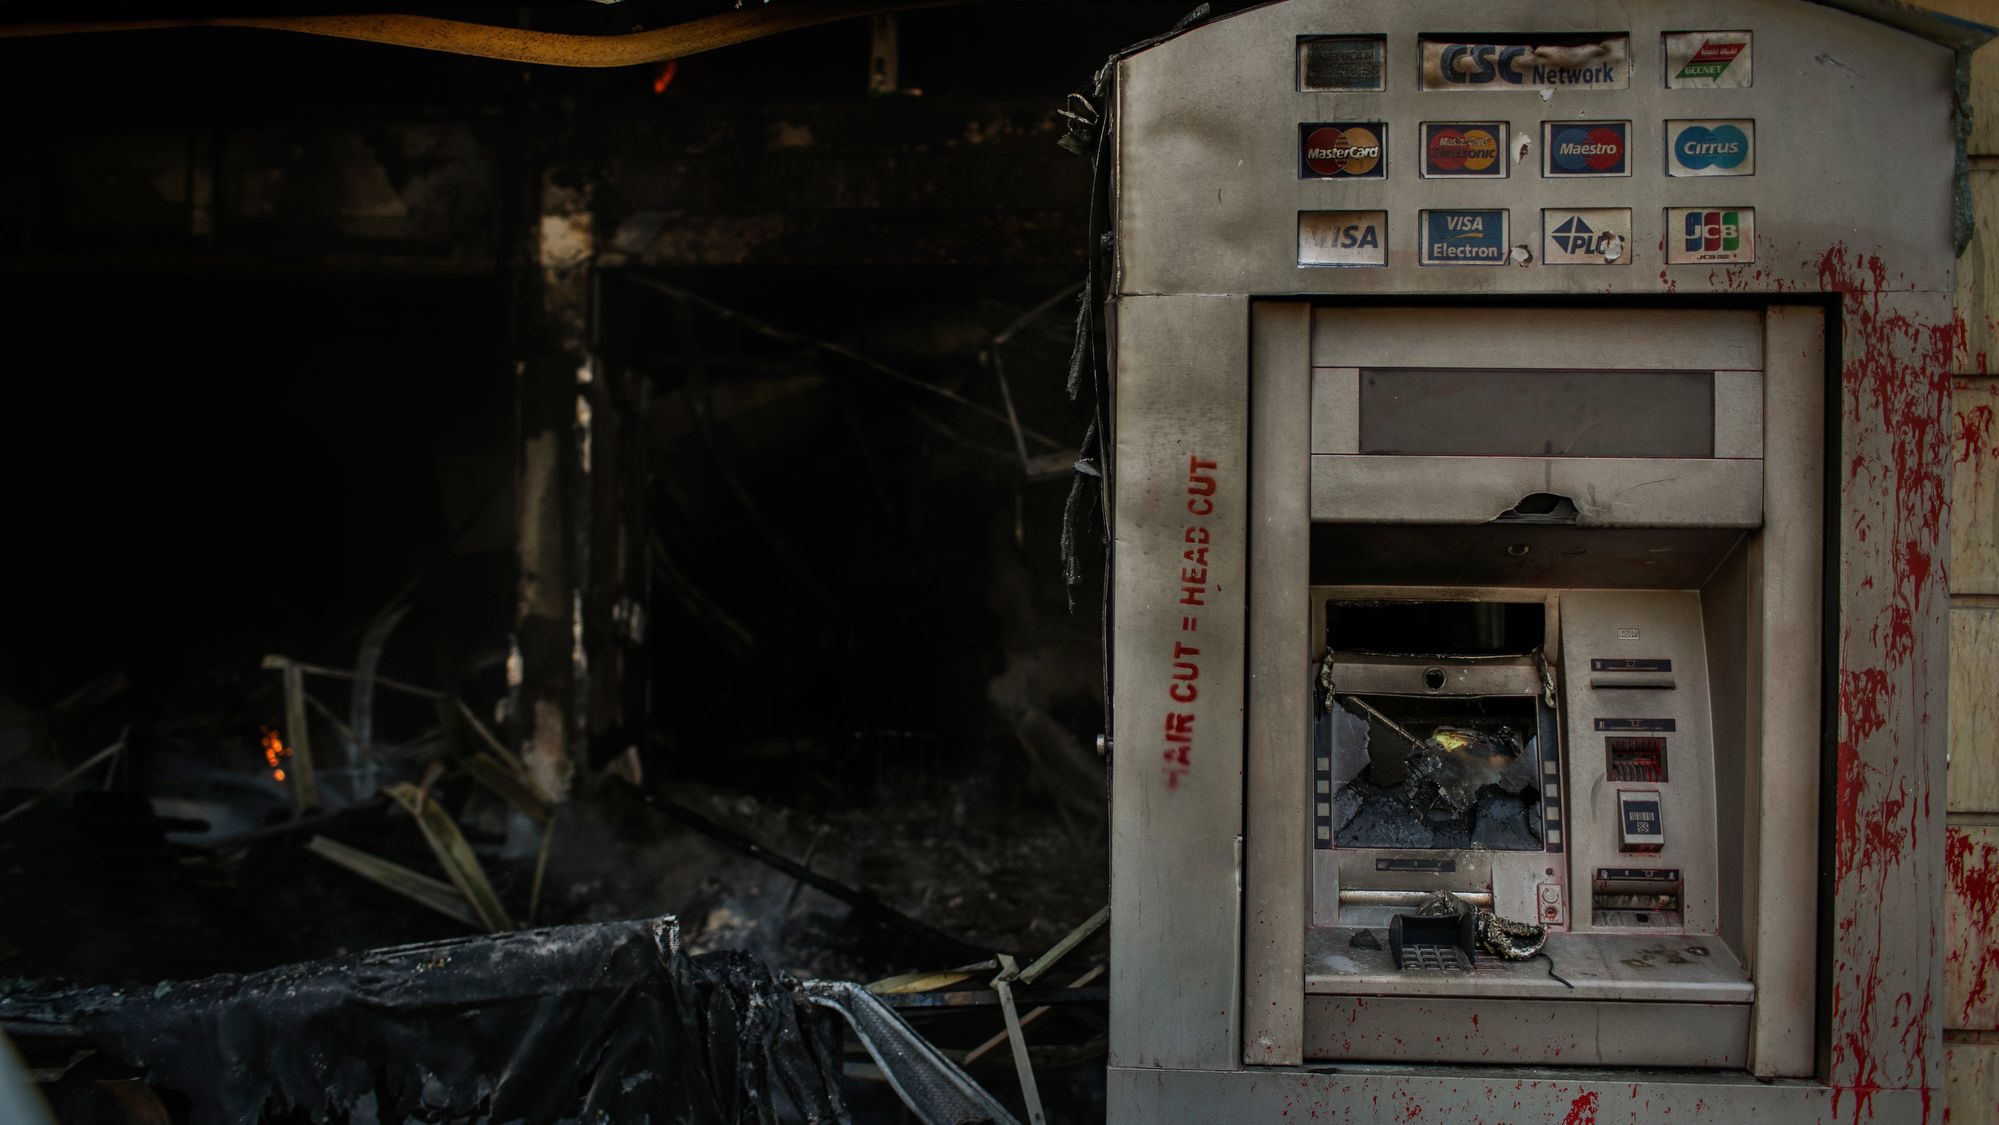 Red paint is seen on a burned ATM on Tuesday. The paint reads "hair cut = head cut."